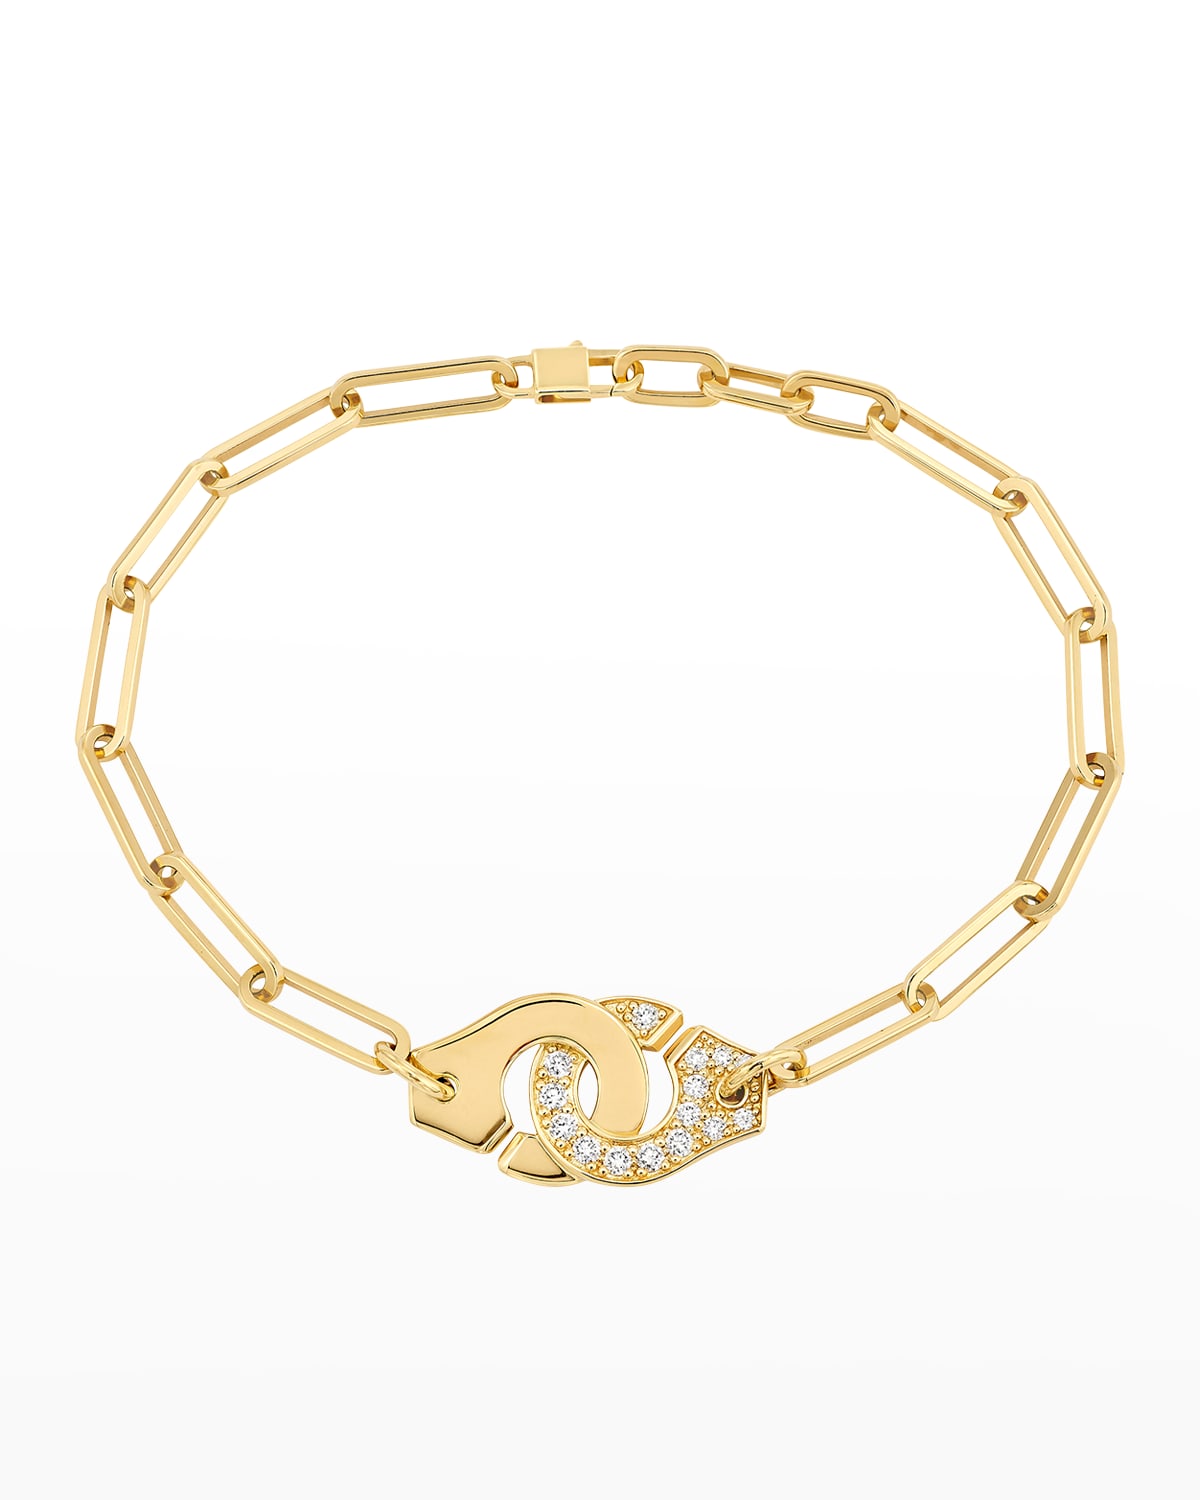 DINH VAN Yellow Gold Menottes R12 Large Bracelet with One Side of Diamonds